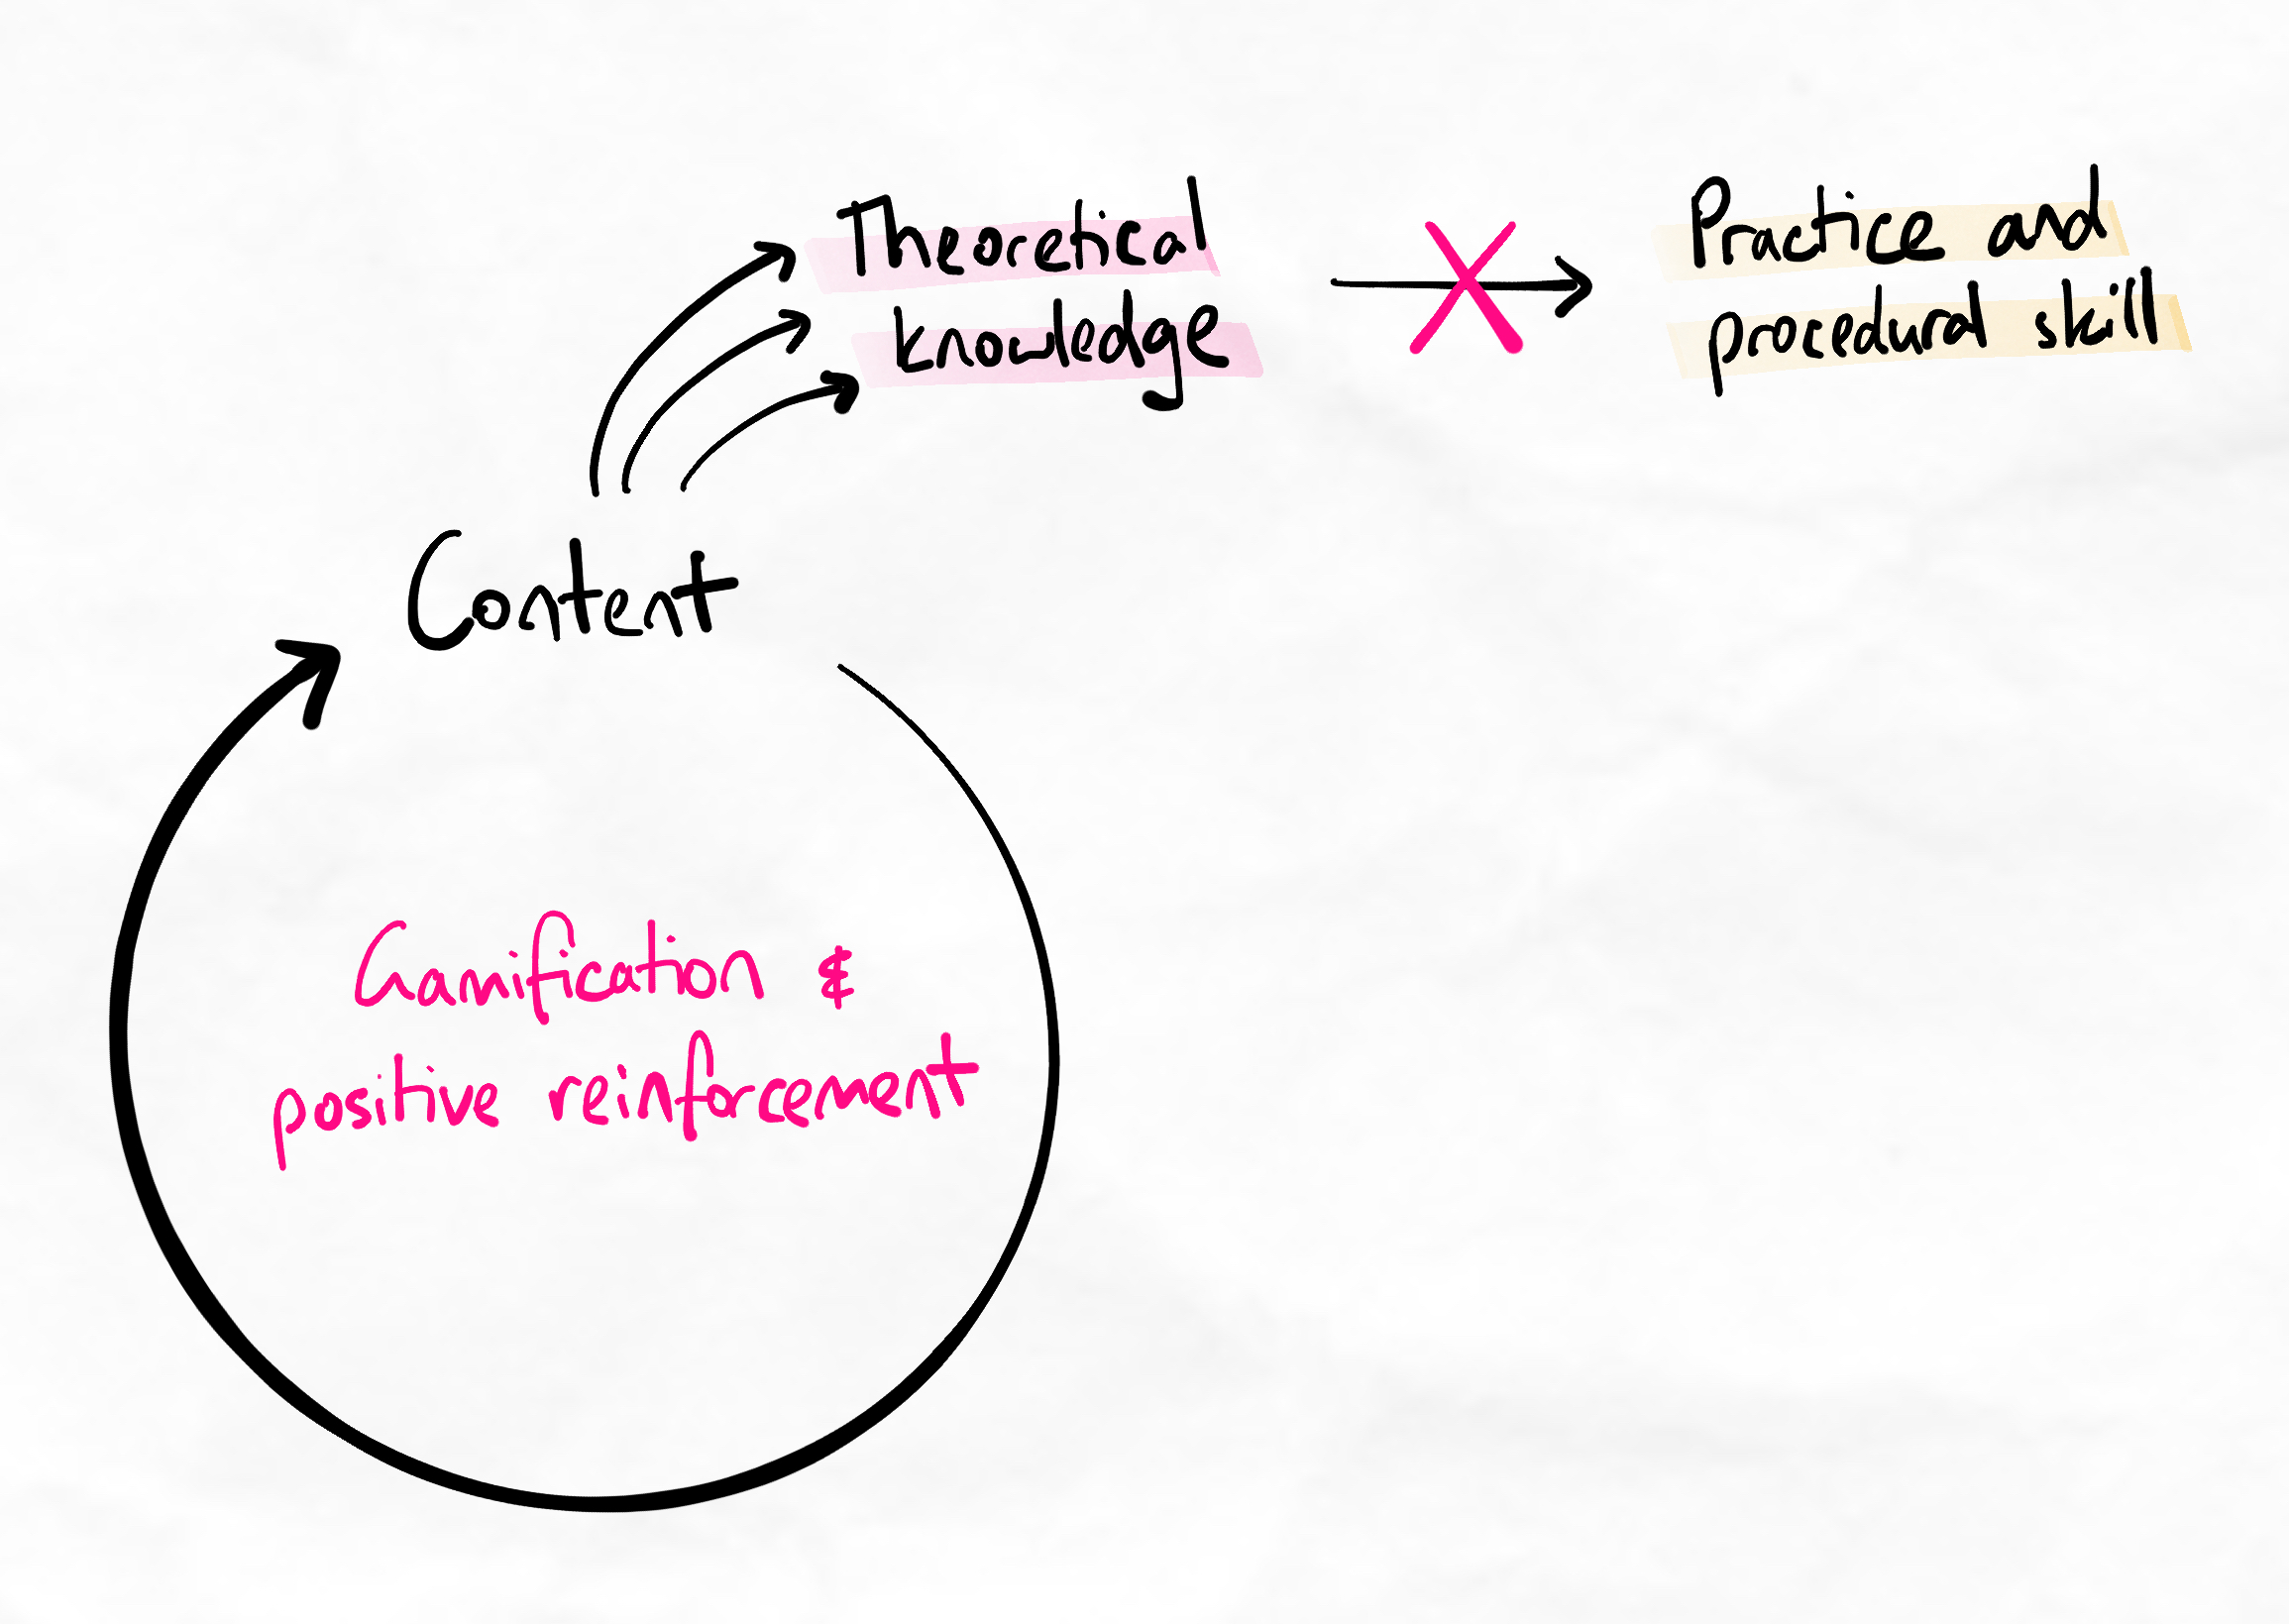 Content incentivised cycles create too much theory compared to practice.